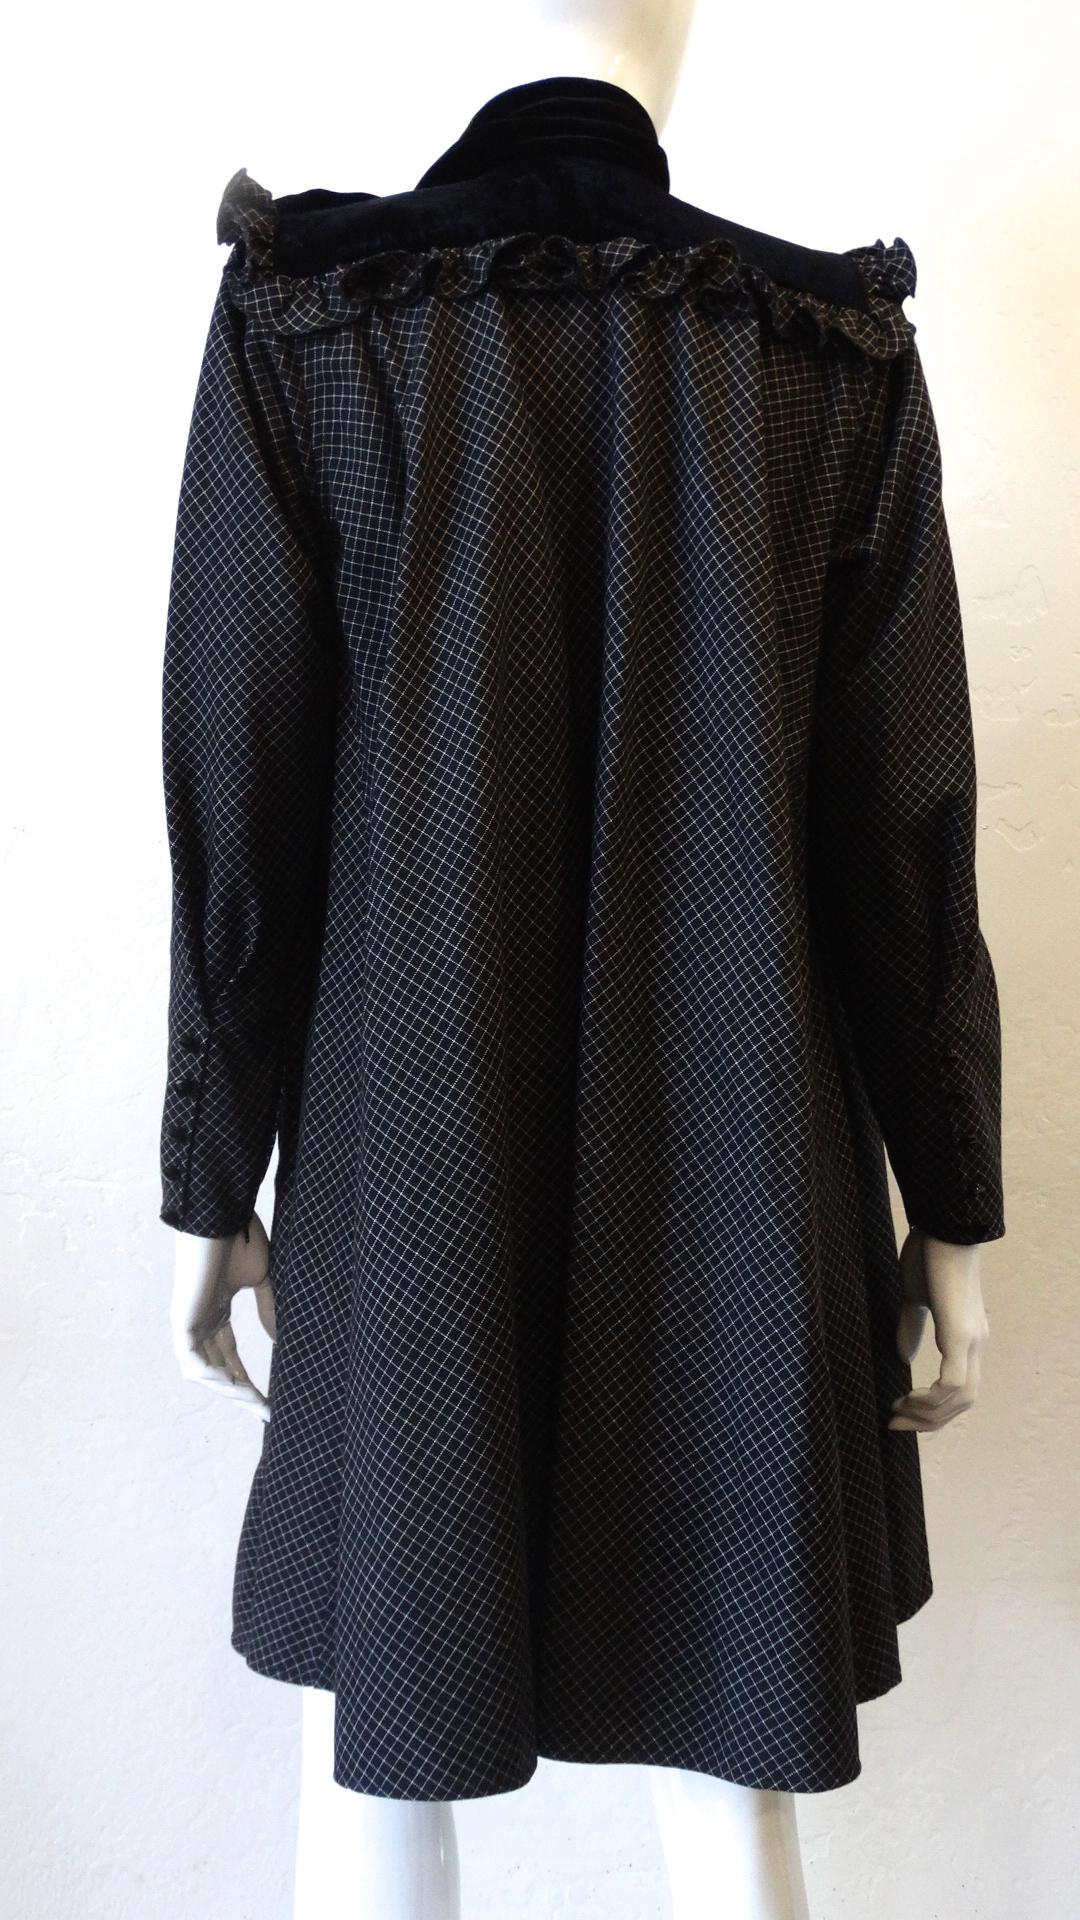 The Perfect 80s Dress Is Here! By Ungaro, this baby doll style dress displays a white checkered pattern and black decorative buttons down the front and on the outside of the cuffs. Leg O Mutton sleeves include zippers on the inside for a fitted